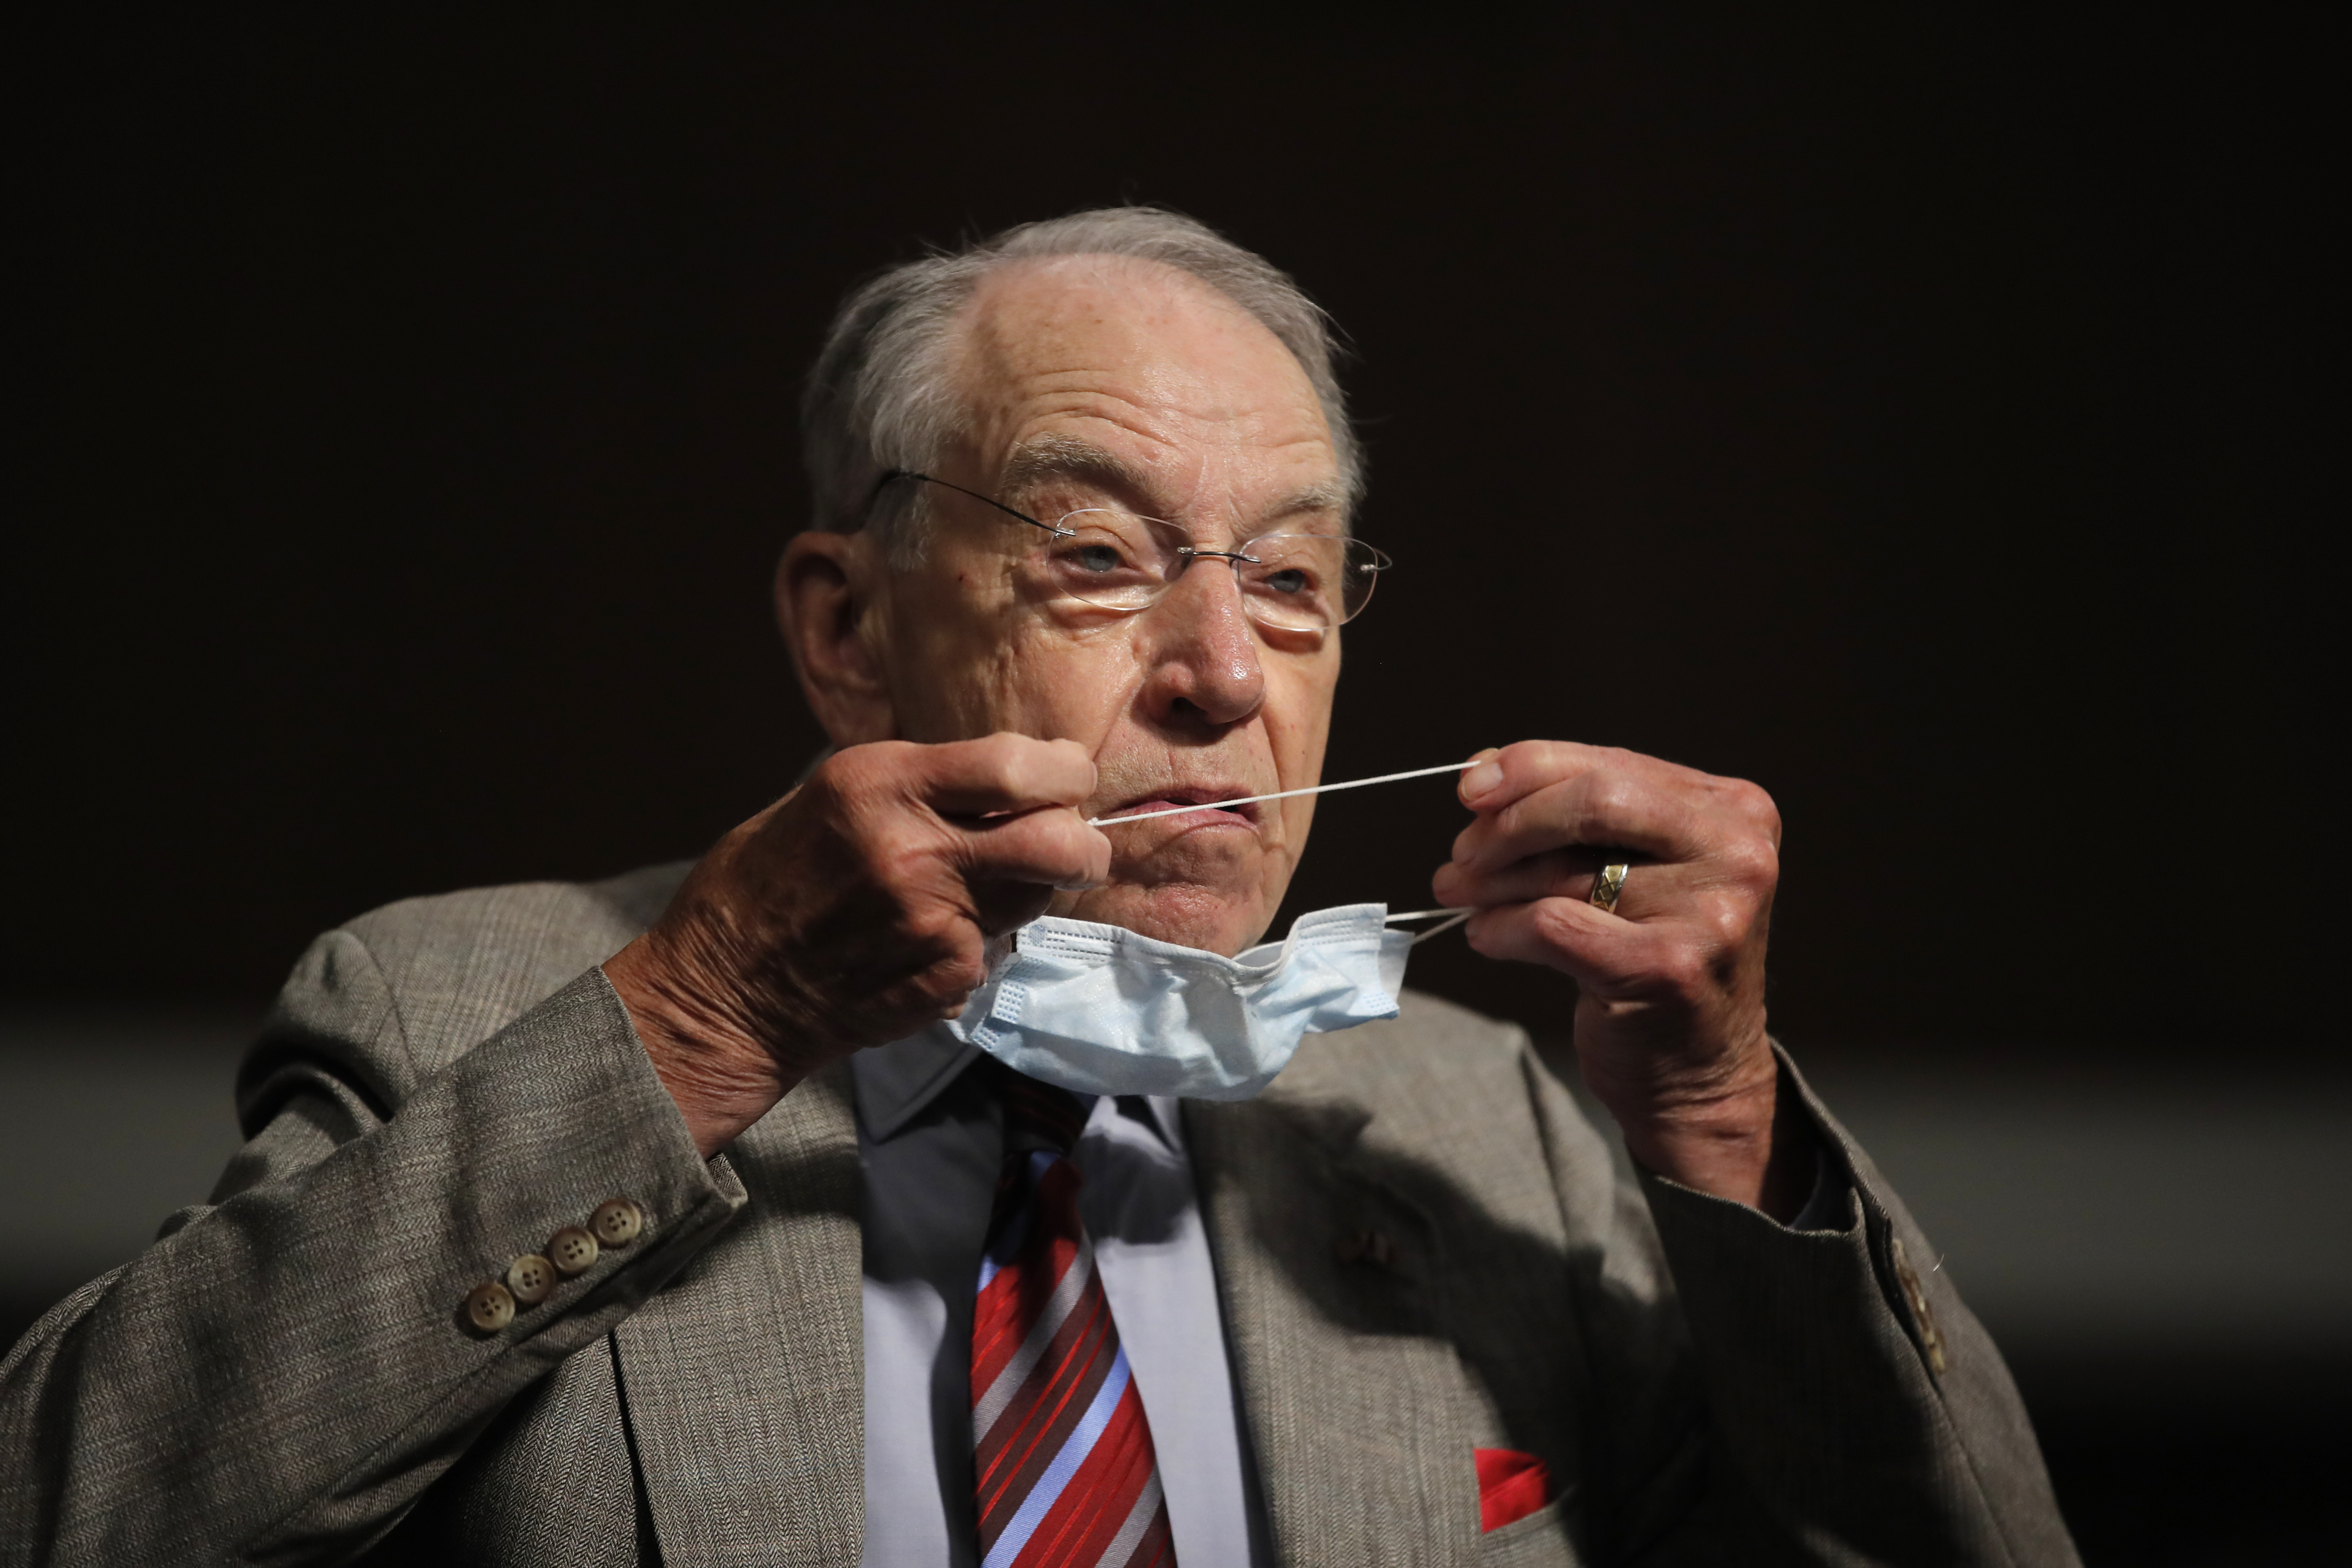 Sen. Chuck Grassley, R-Iowa, puts on a face mask during a Senate Judiciary Committee on Capitol Hill in Washington on June 11, 2020.